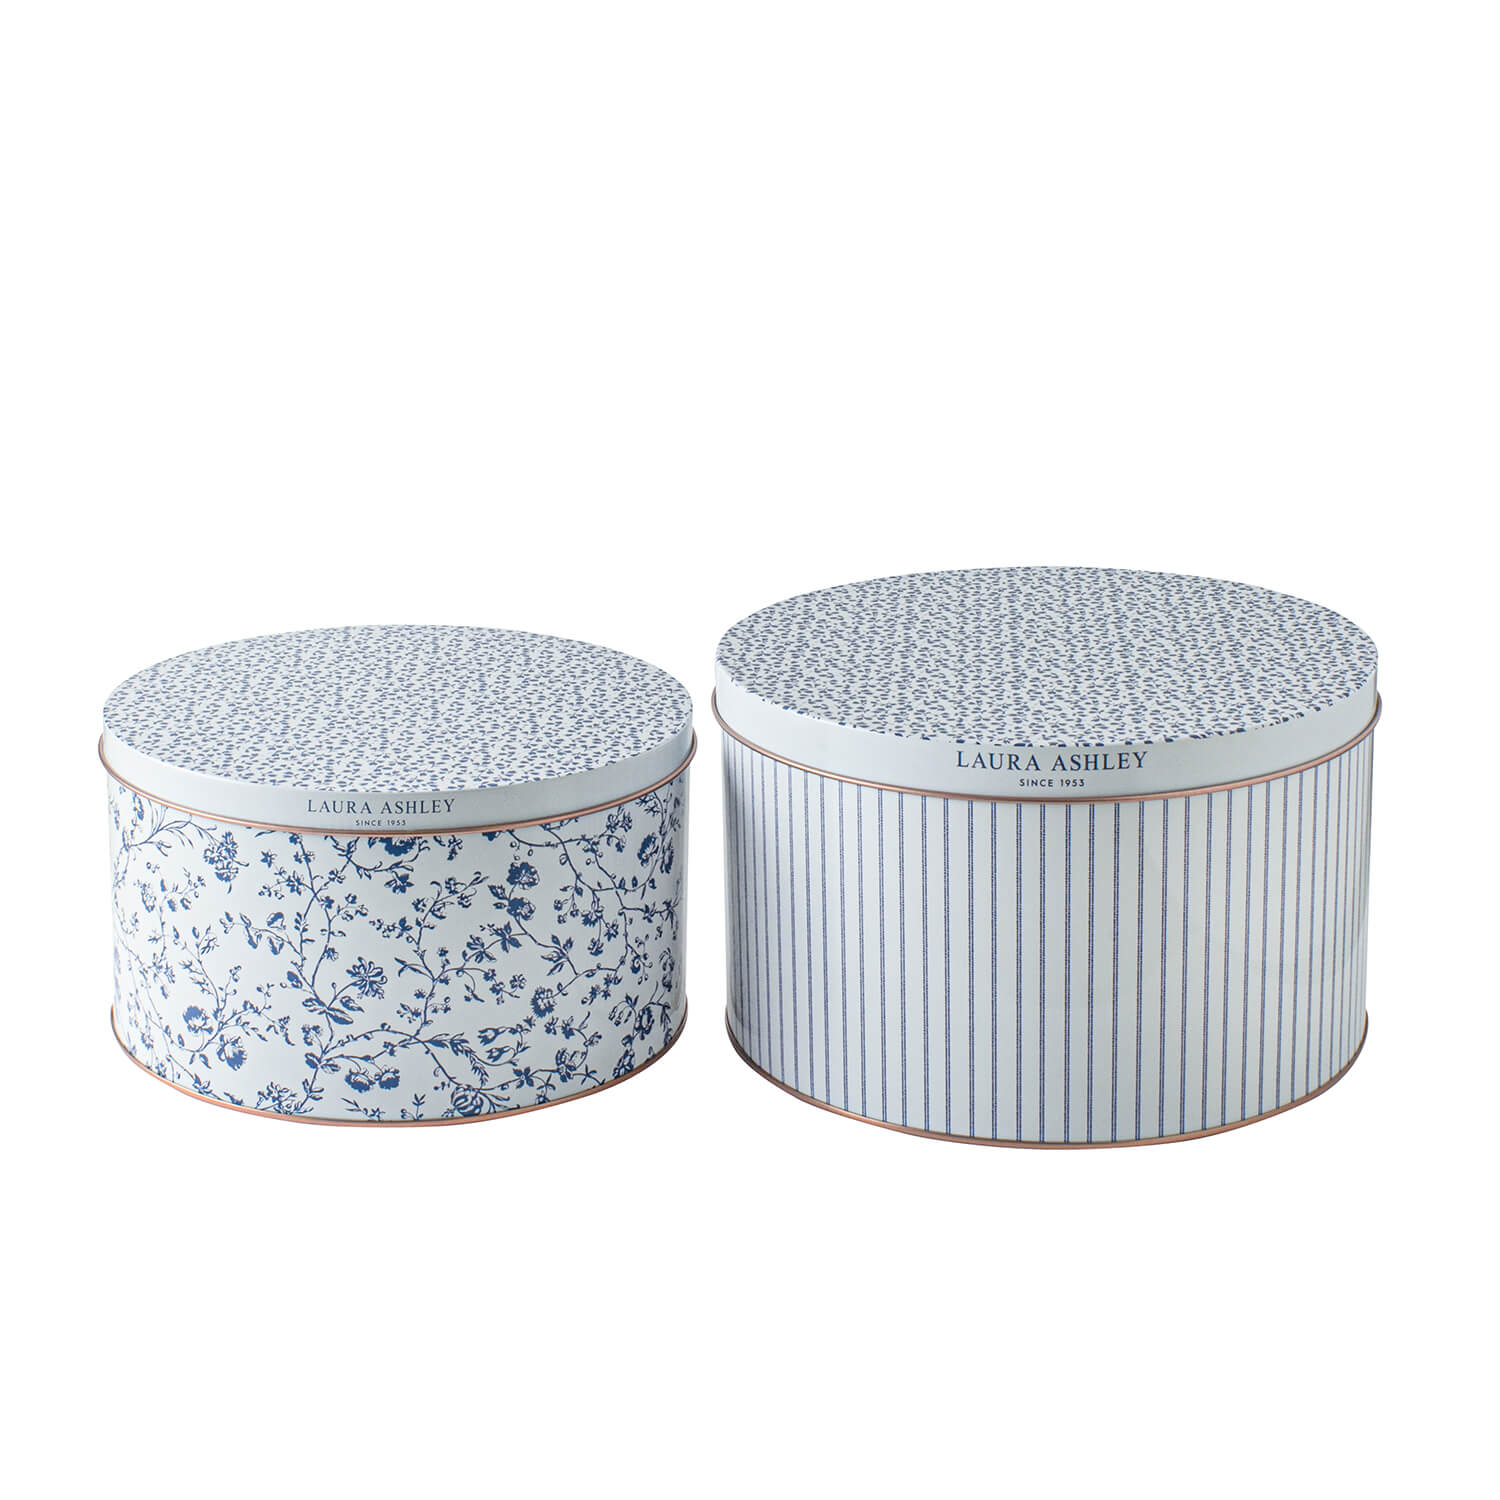 Laura Ashley Blueprint Collectables Set of 2 Tin Jars 1 Shaws Department Stores